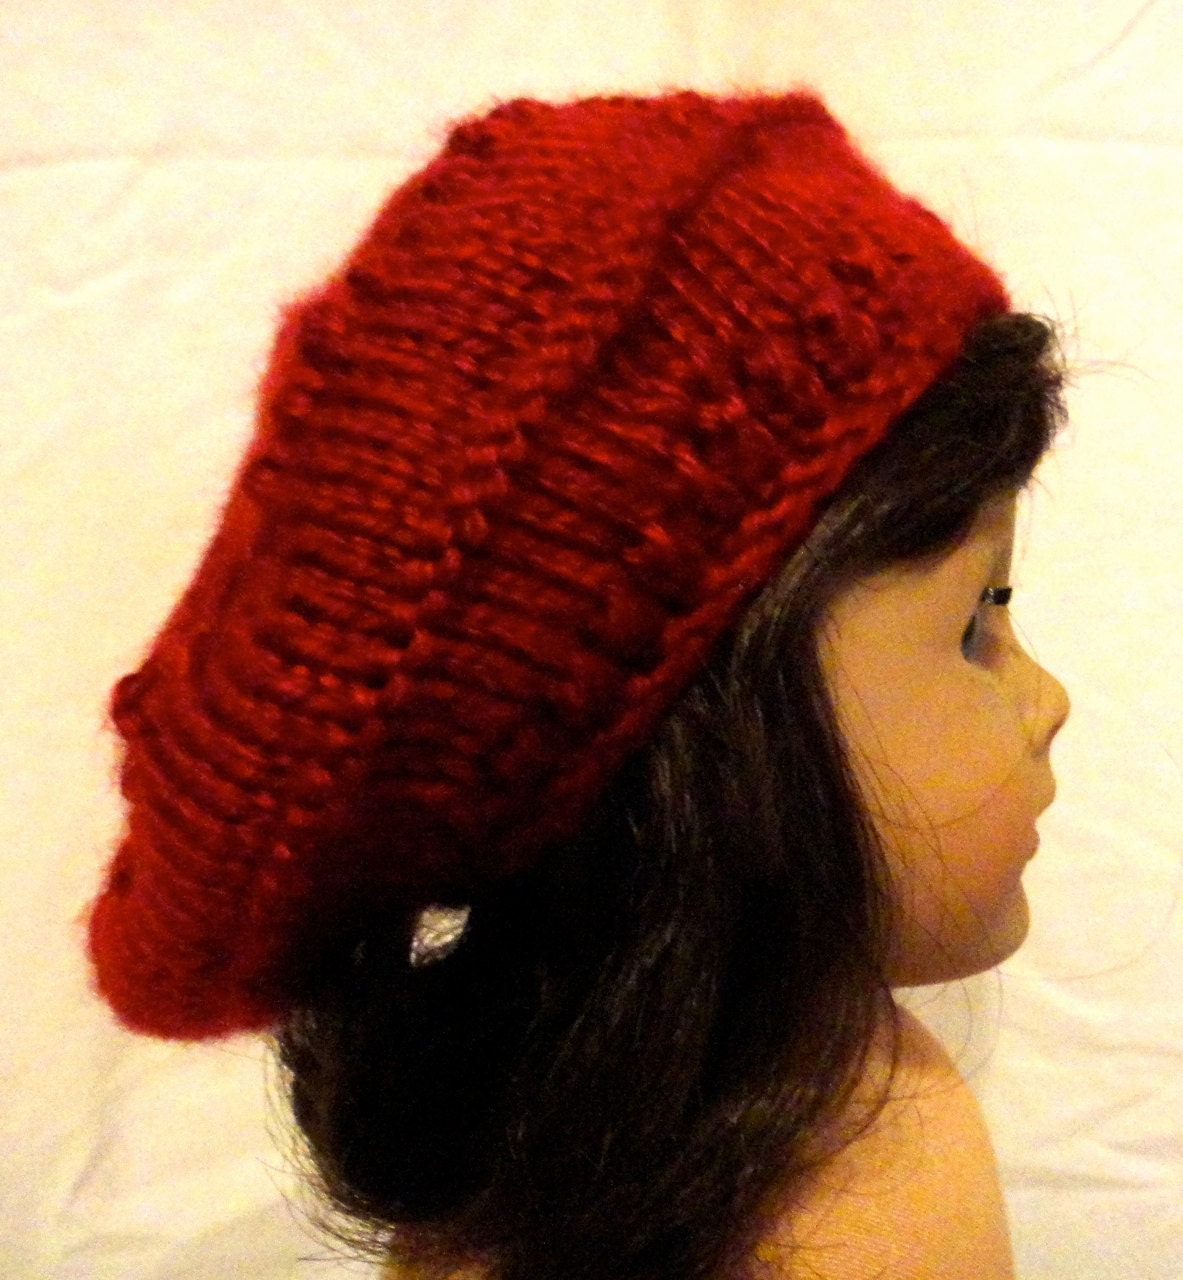 American Girl Doll Slouch Beret Hat